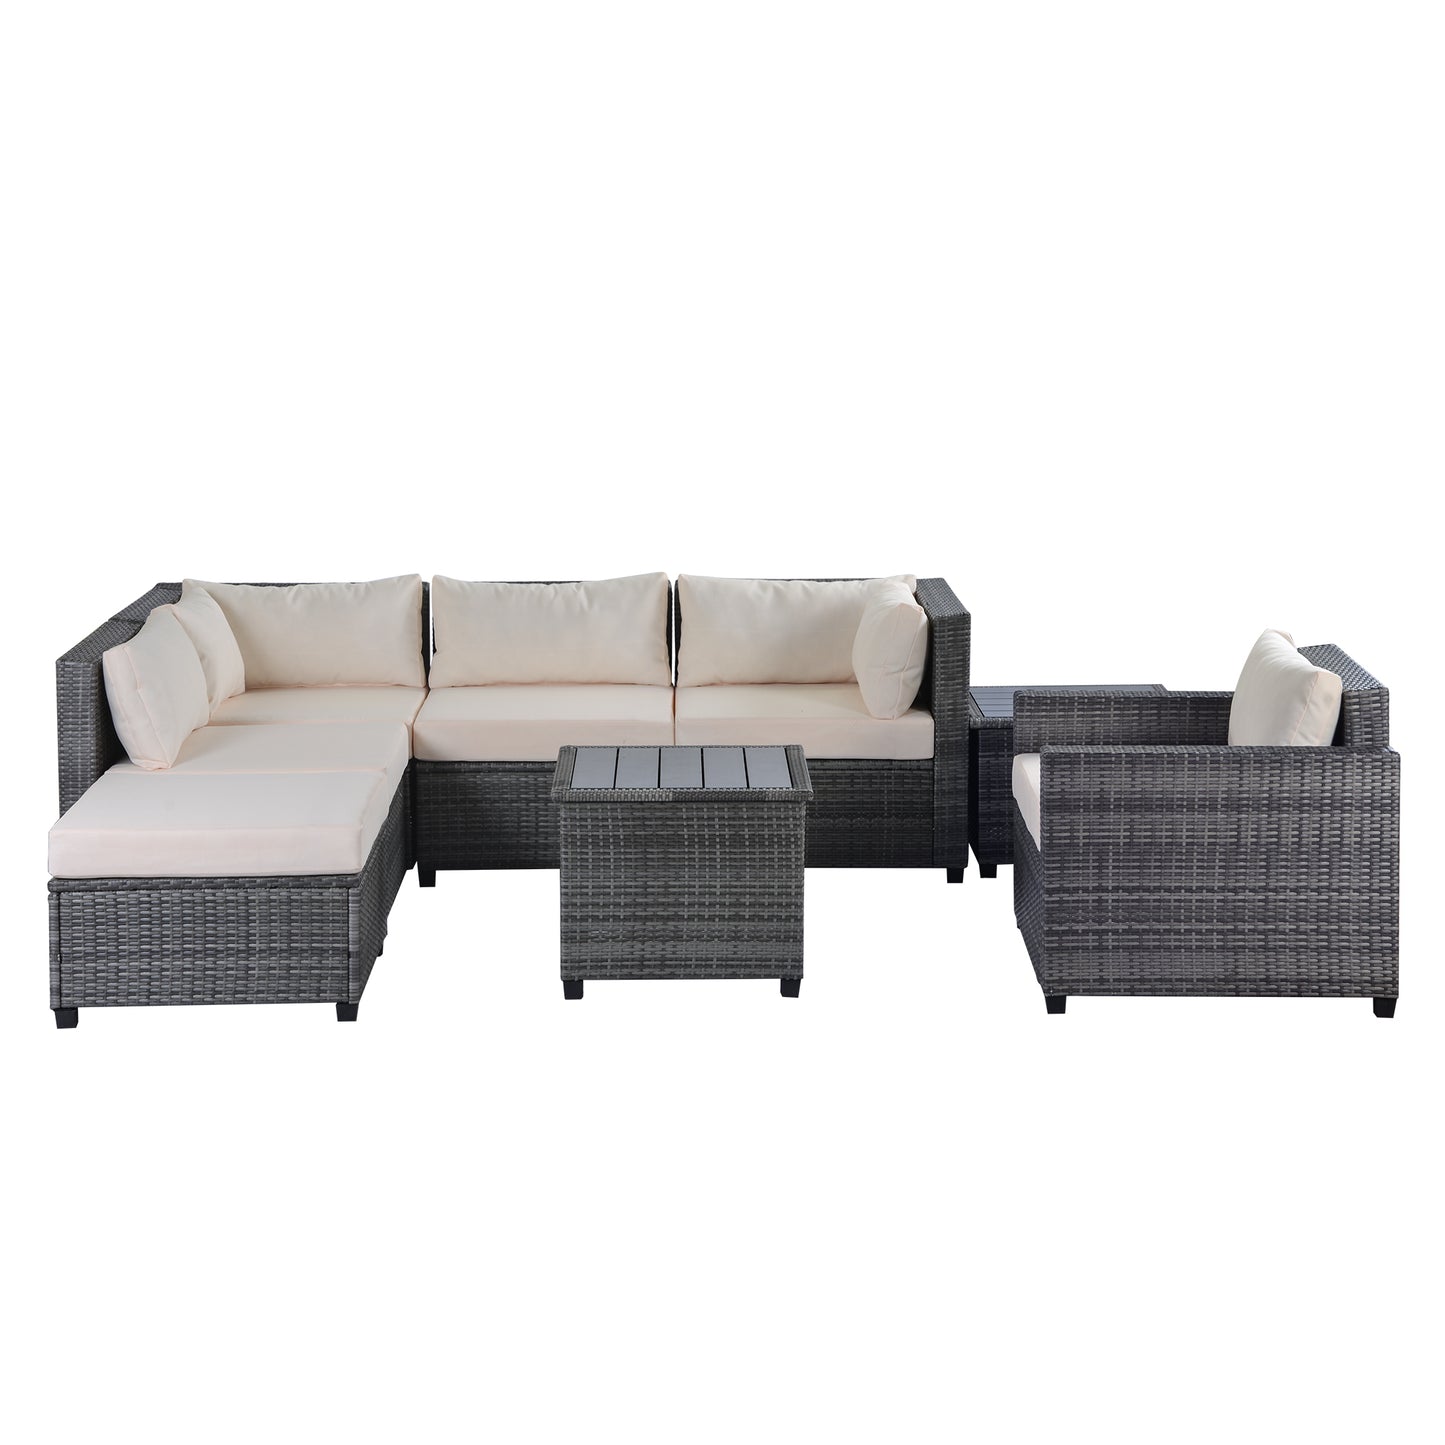 8 Piece Beige Rattan Sectional Seating